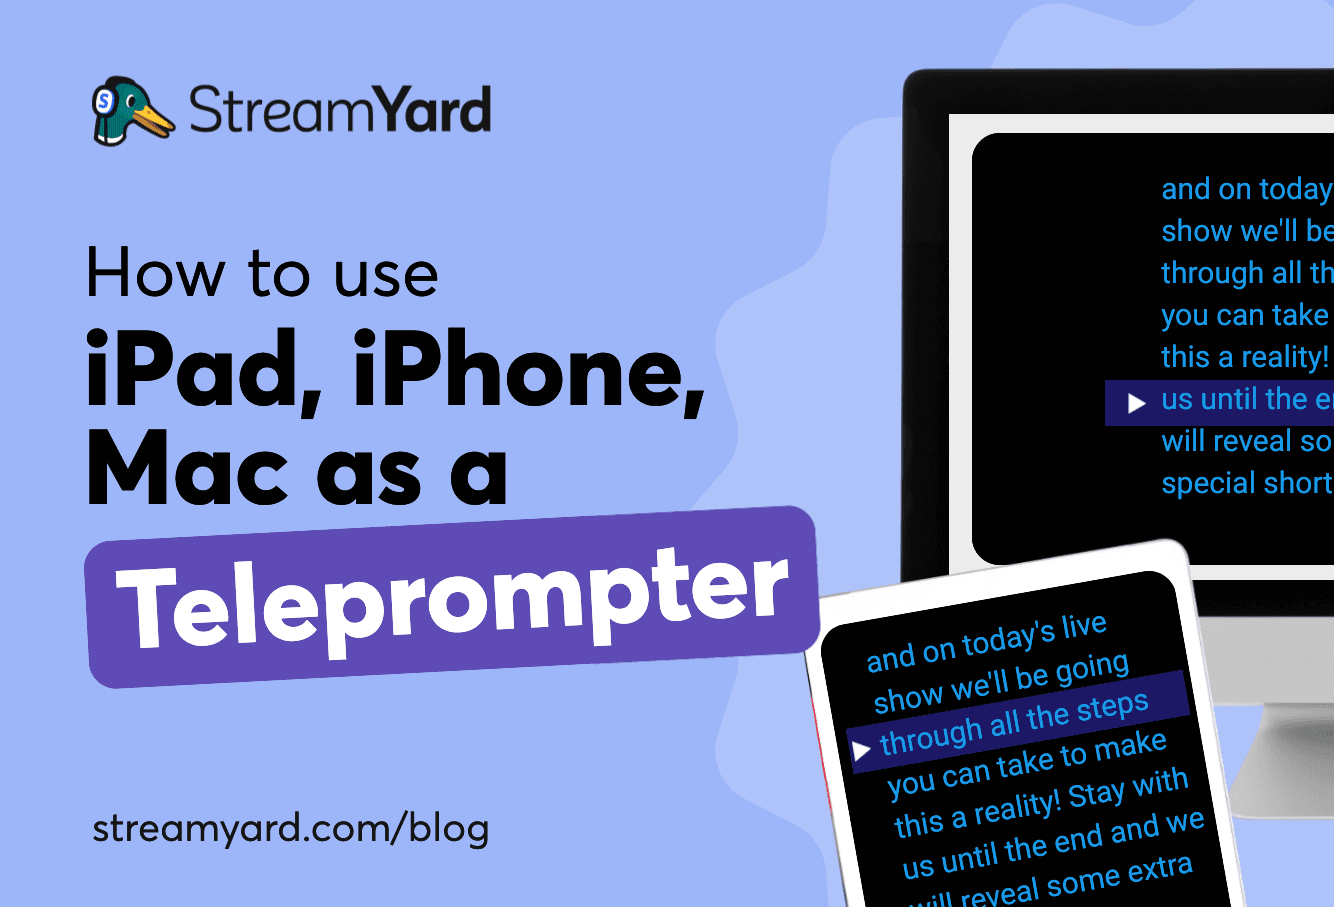 Learn how to use an iPad, iPhone, Mac as a teleprompter and maintain eye contact with your audience as you go on-screen.